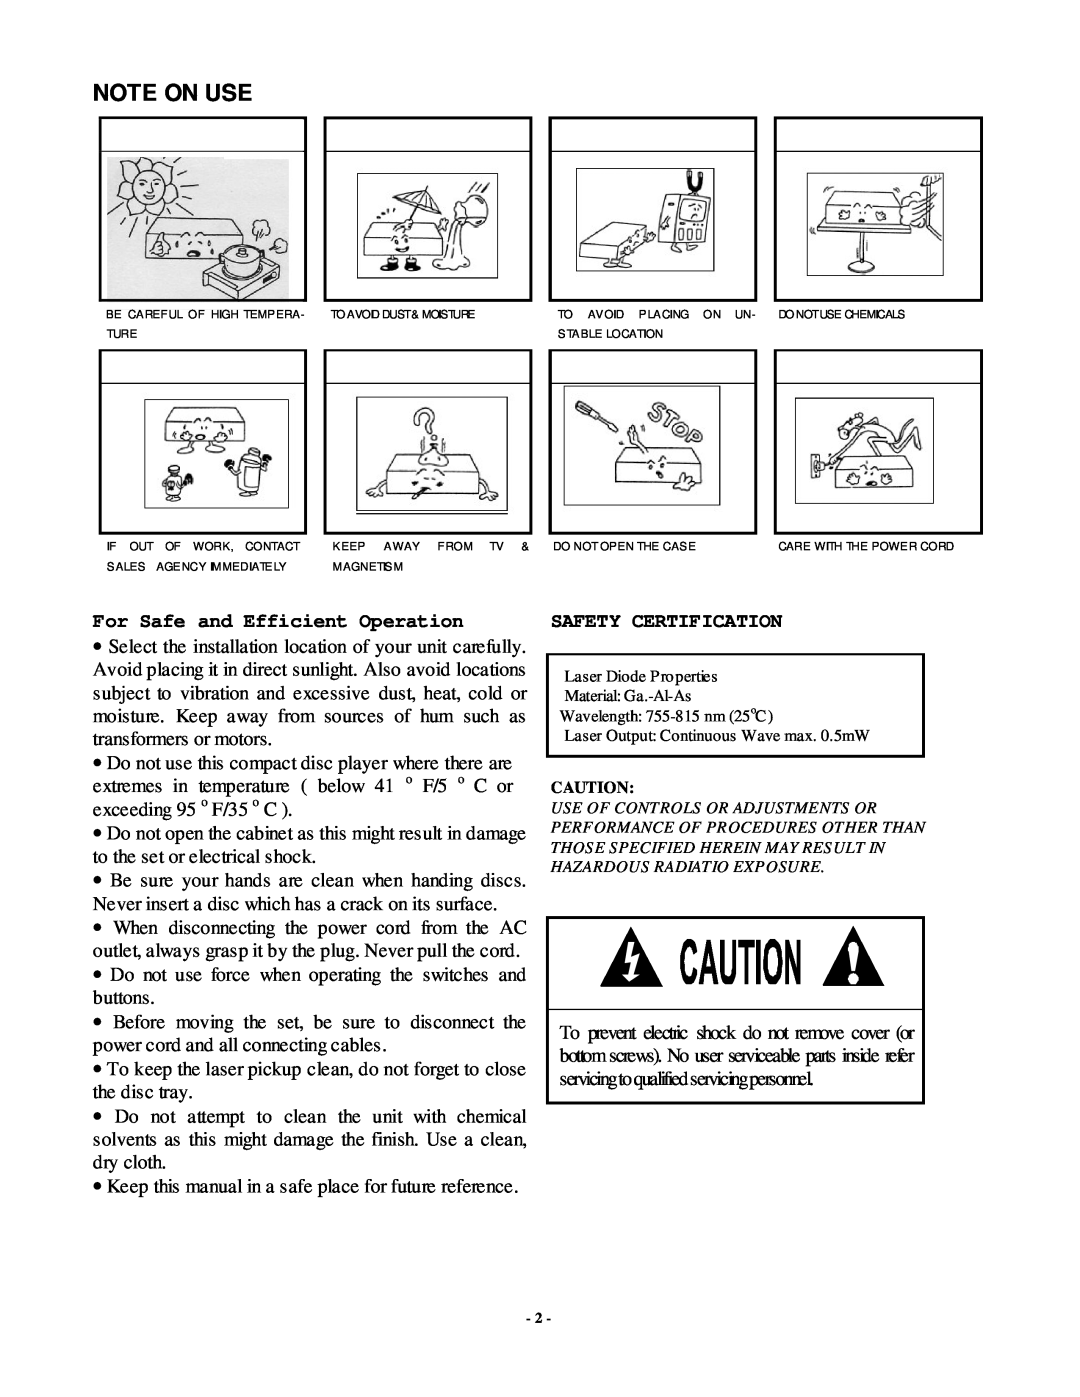 Radio Shack PDCD810 manual Note On Use, For Safe and Efficient Operation, Safety Certification 